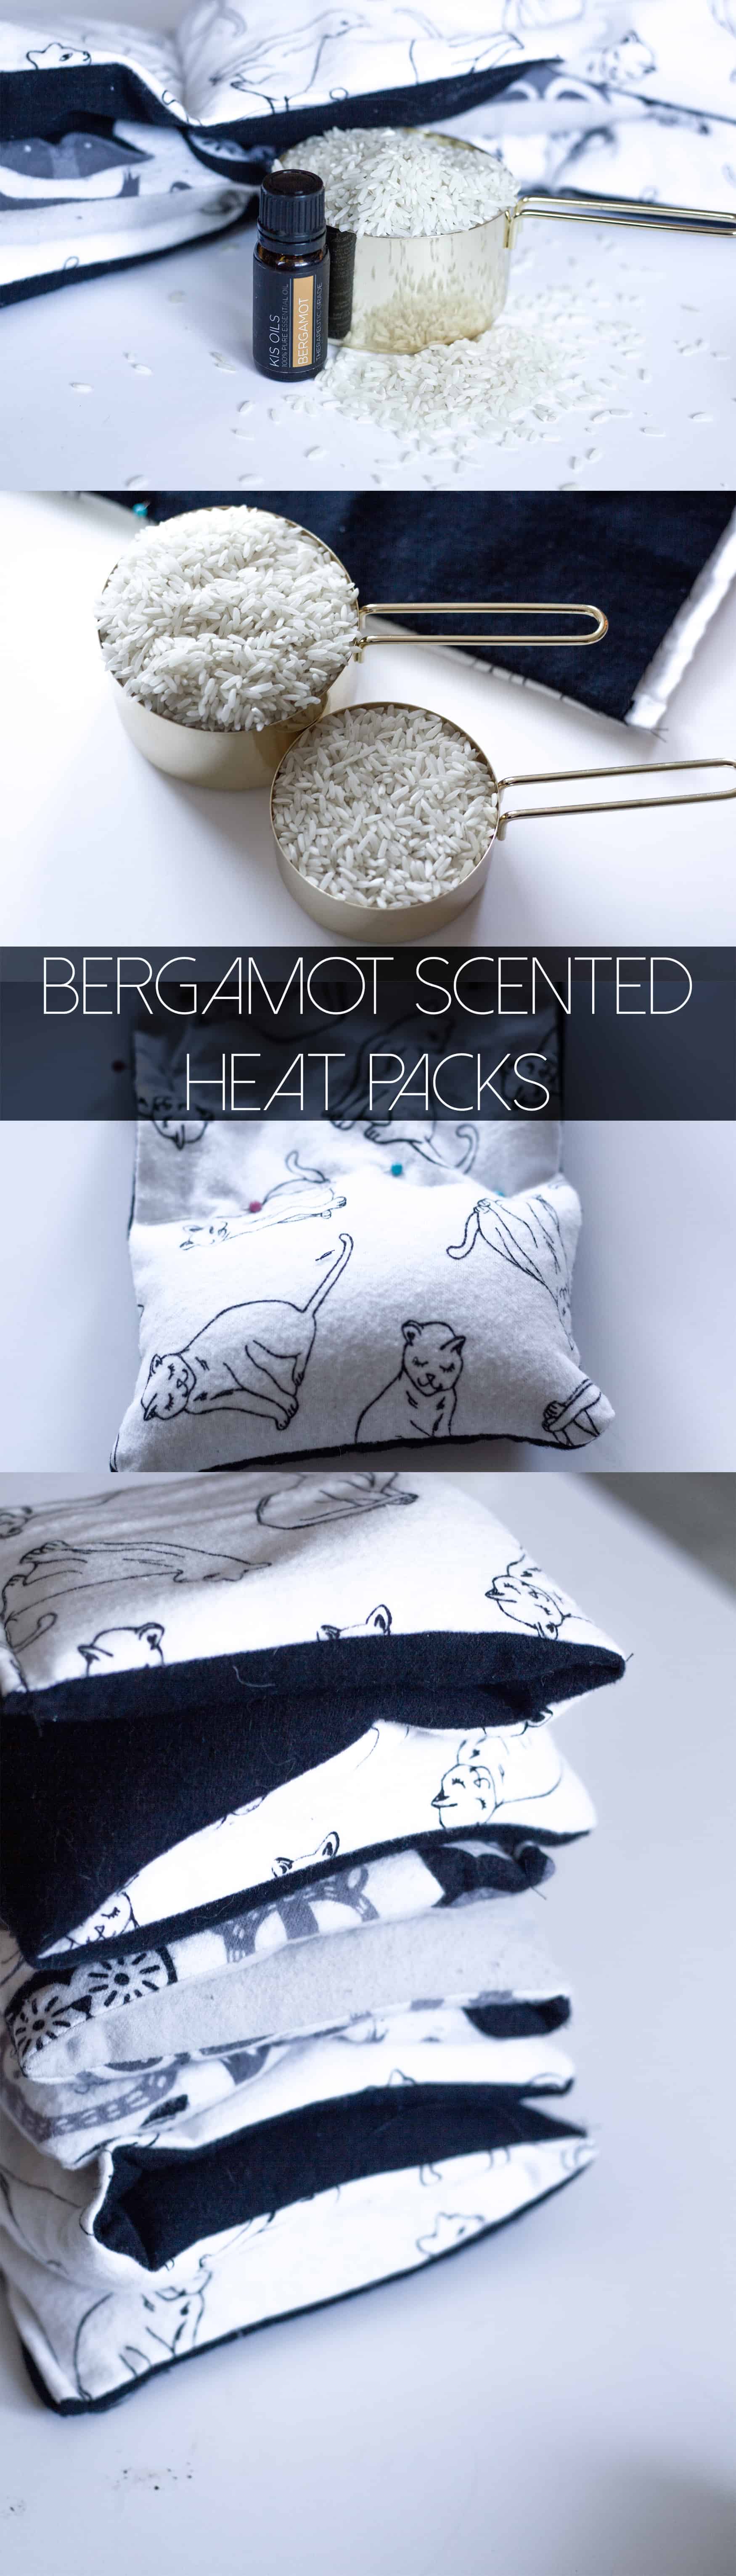 These scented heated rice packs are great to have around your house or give as gifts and are not difficult to make at all!